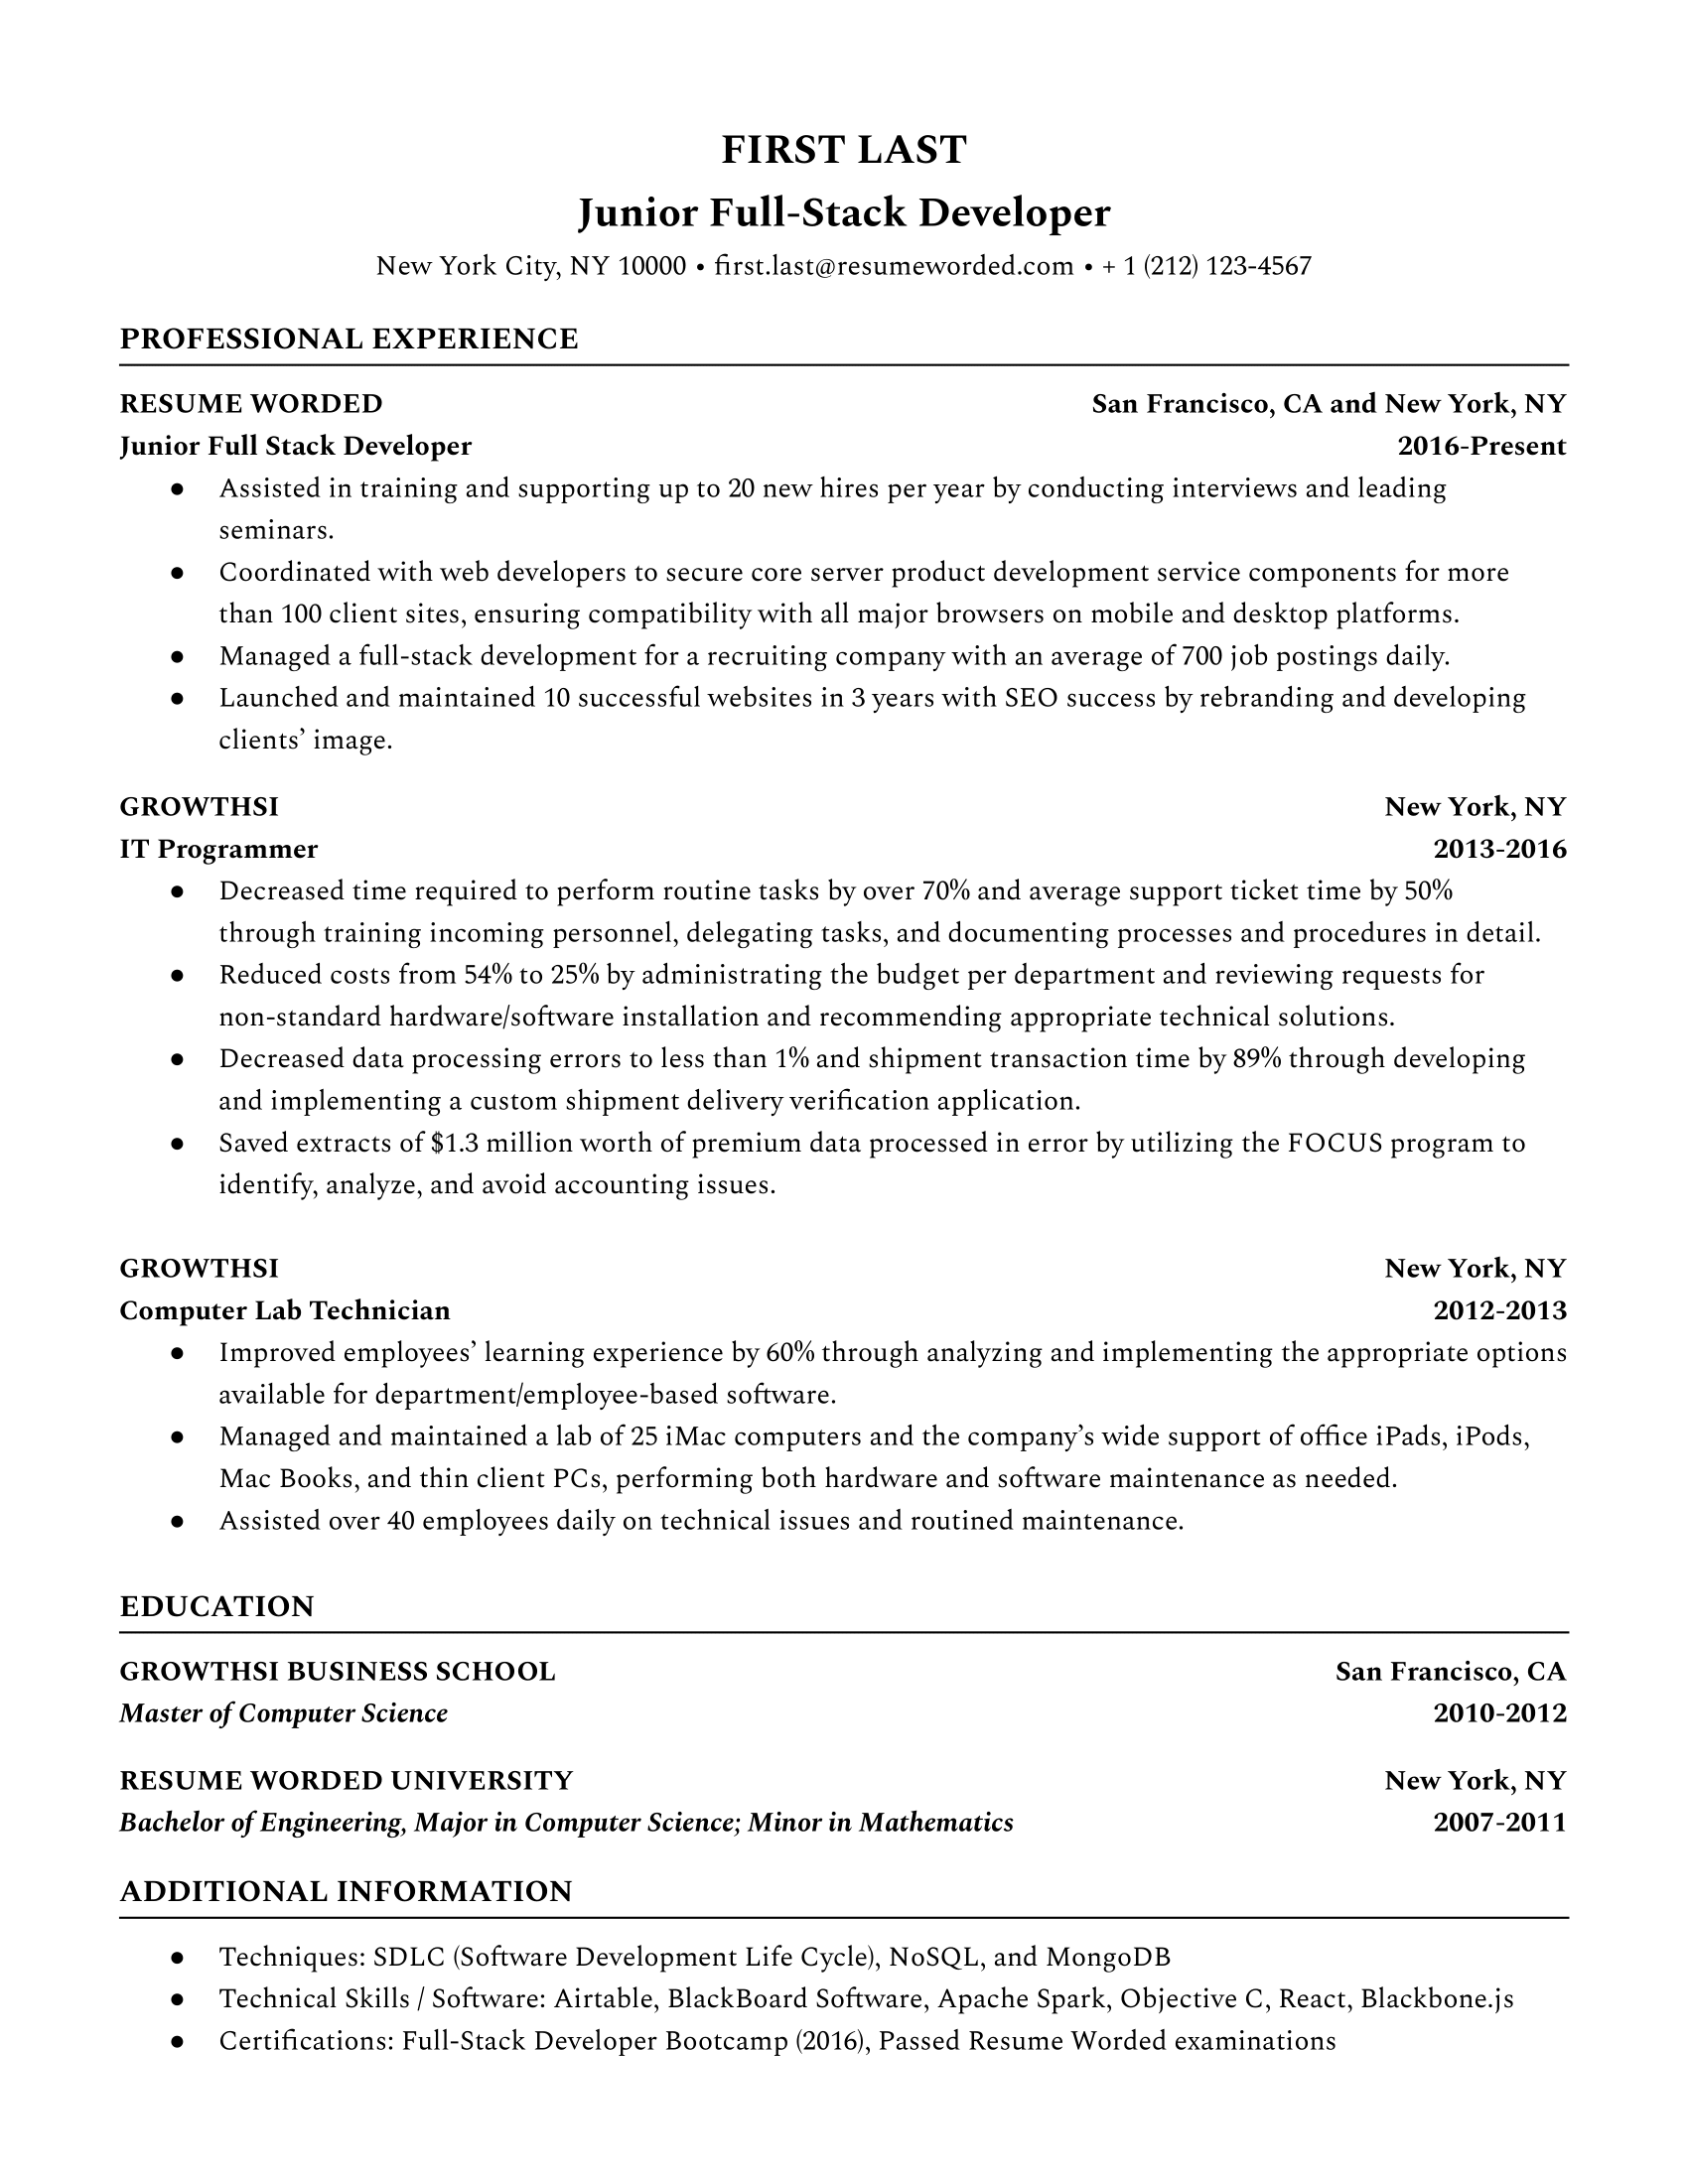 A junior full stack developer resume that highlights relevantIT experience, a related computer science education, and certifications.